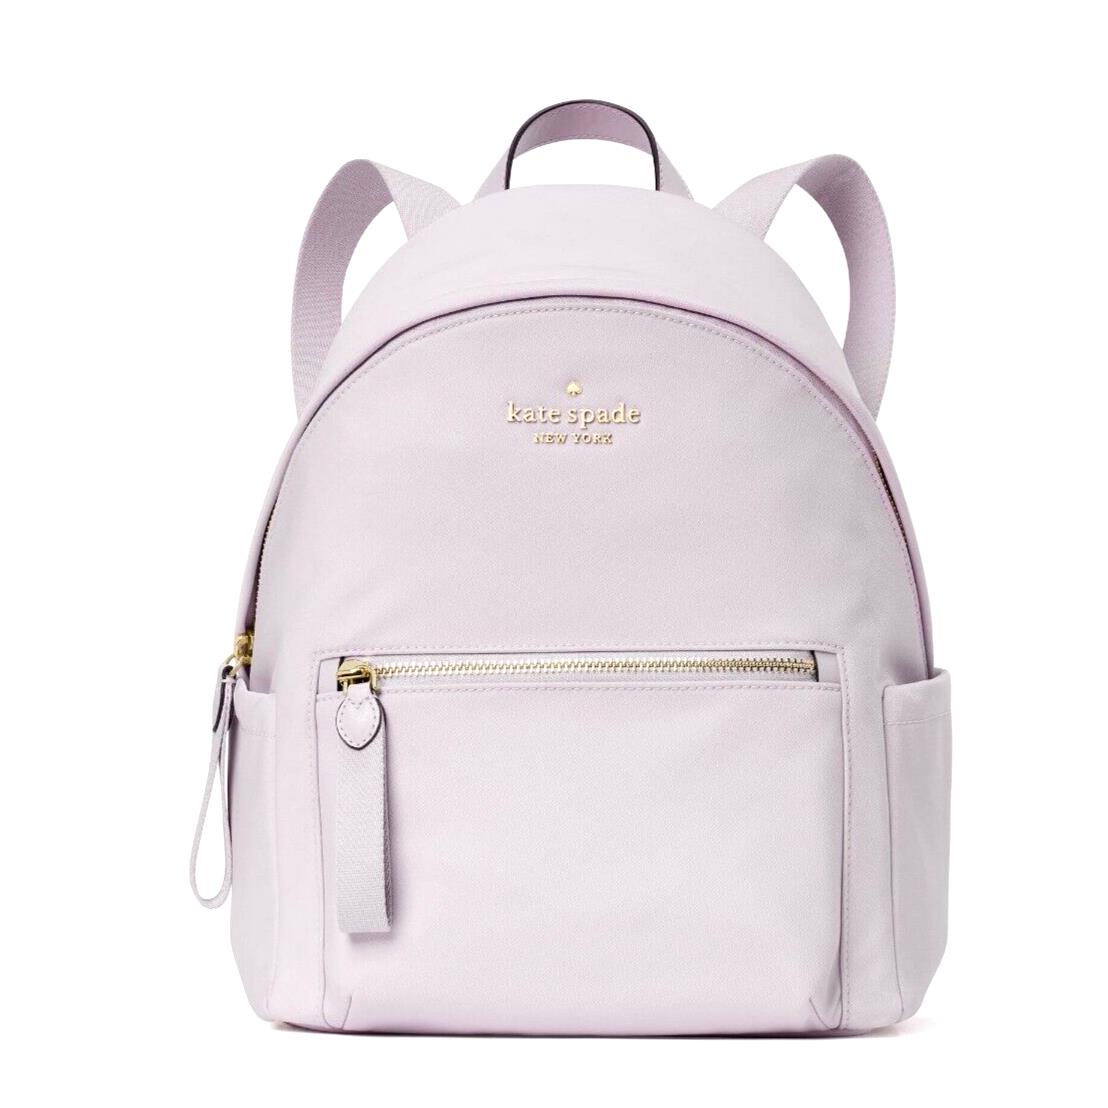 New Kate Spade Chelsea Medium Backpack Nylon Lilac Moonlight with Dust Bag